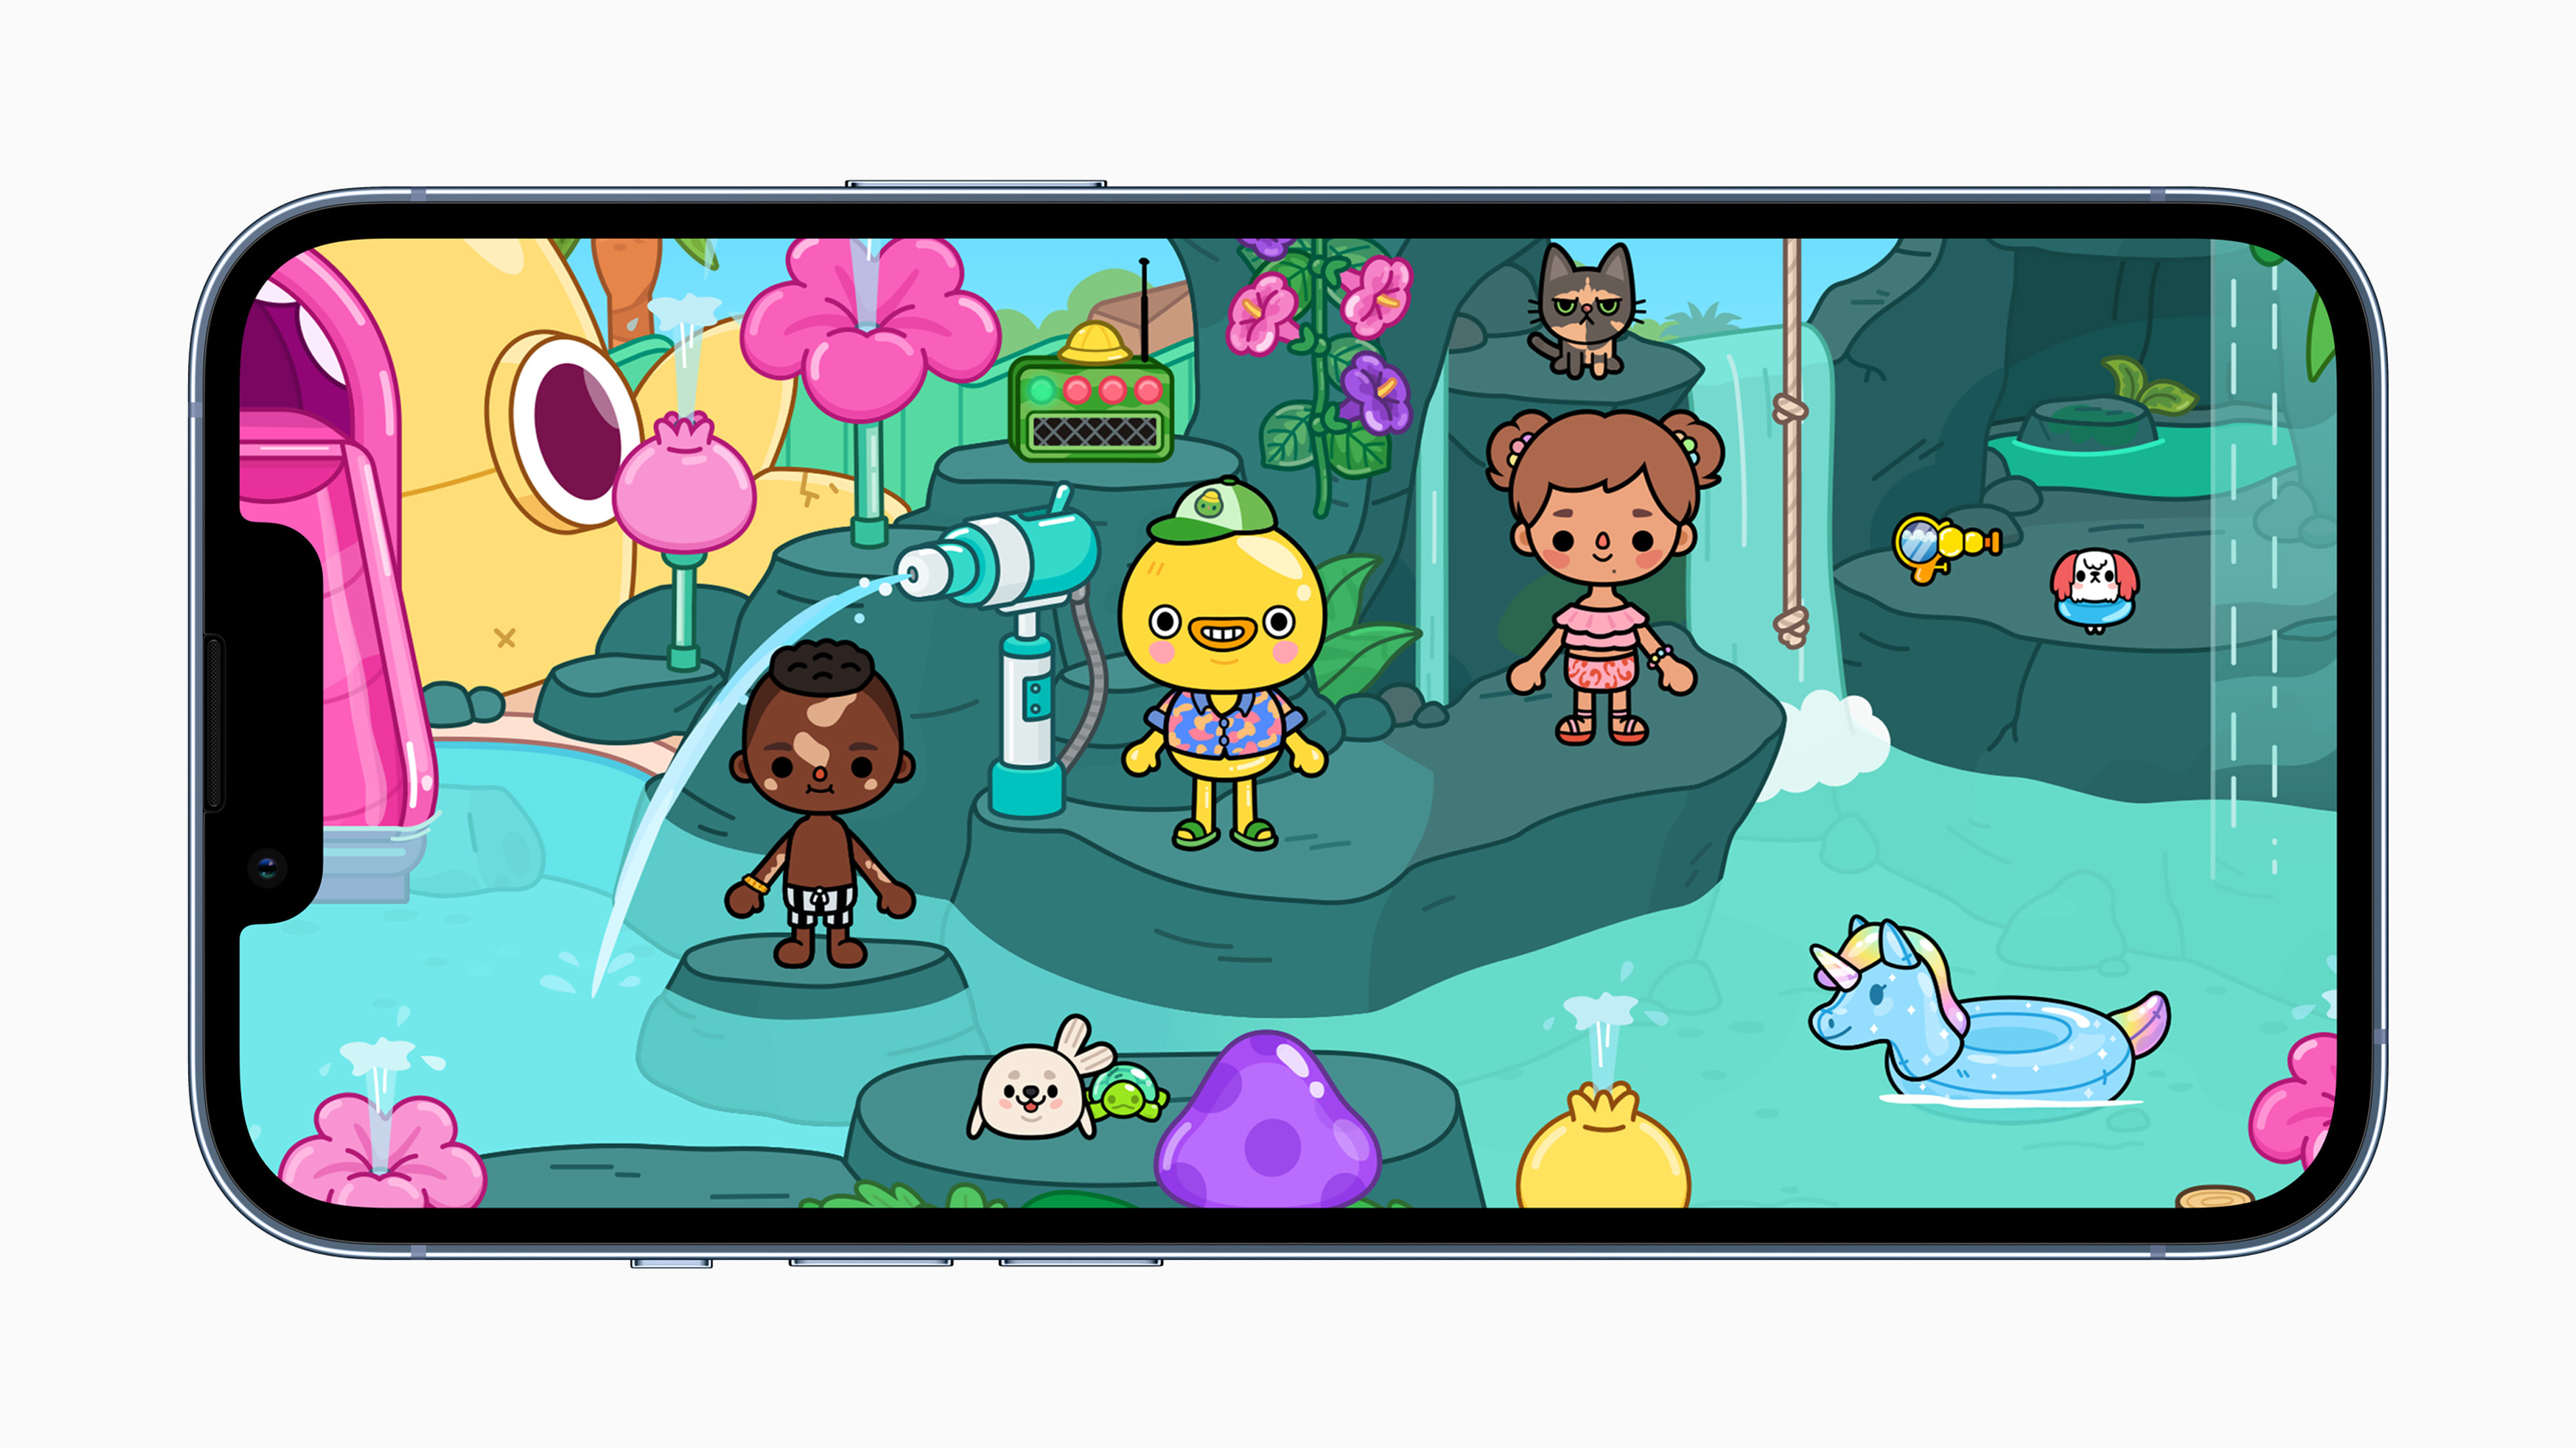 A look at three games that won a coveted Apple App Store Award